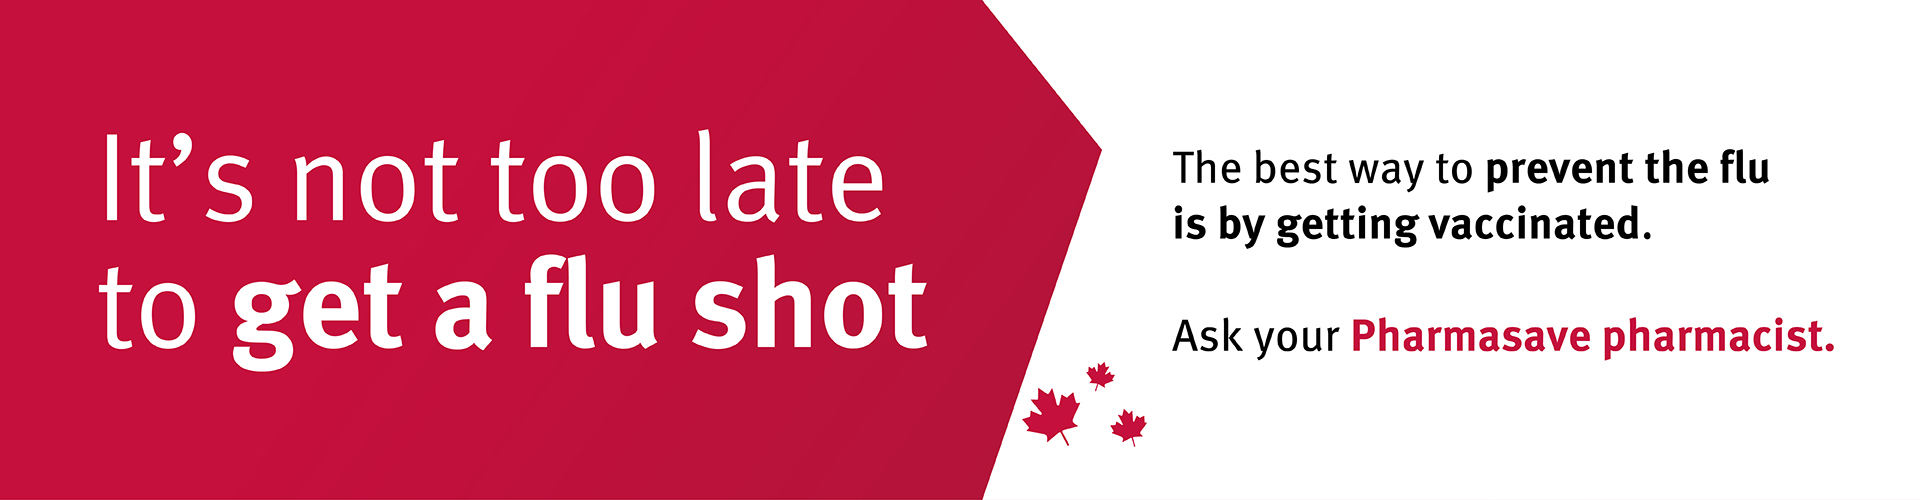 It's not to late to get a flu shot. Speak with your Pharmasave pharmacist.